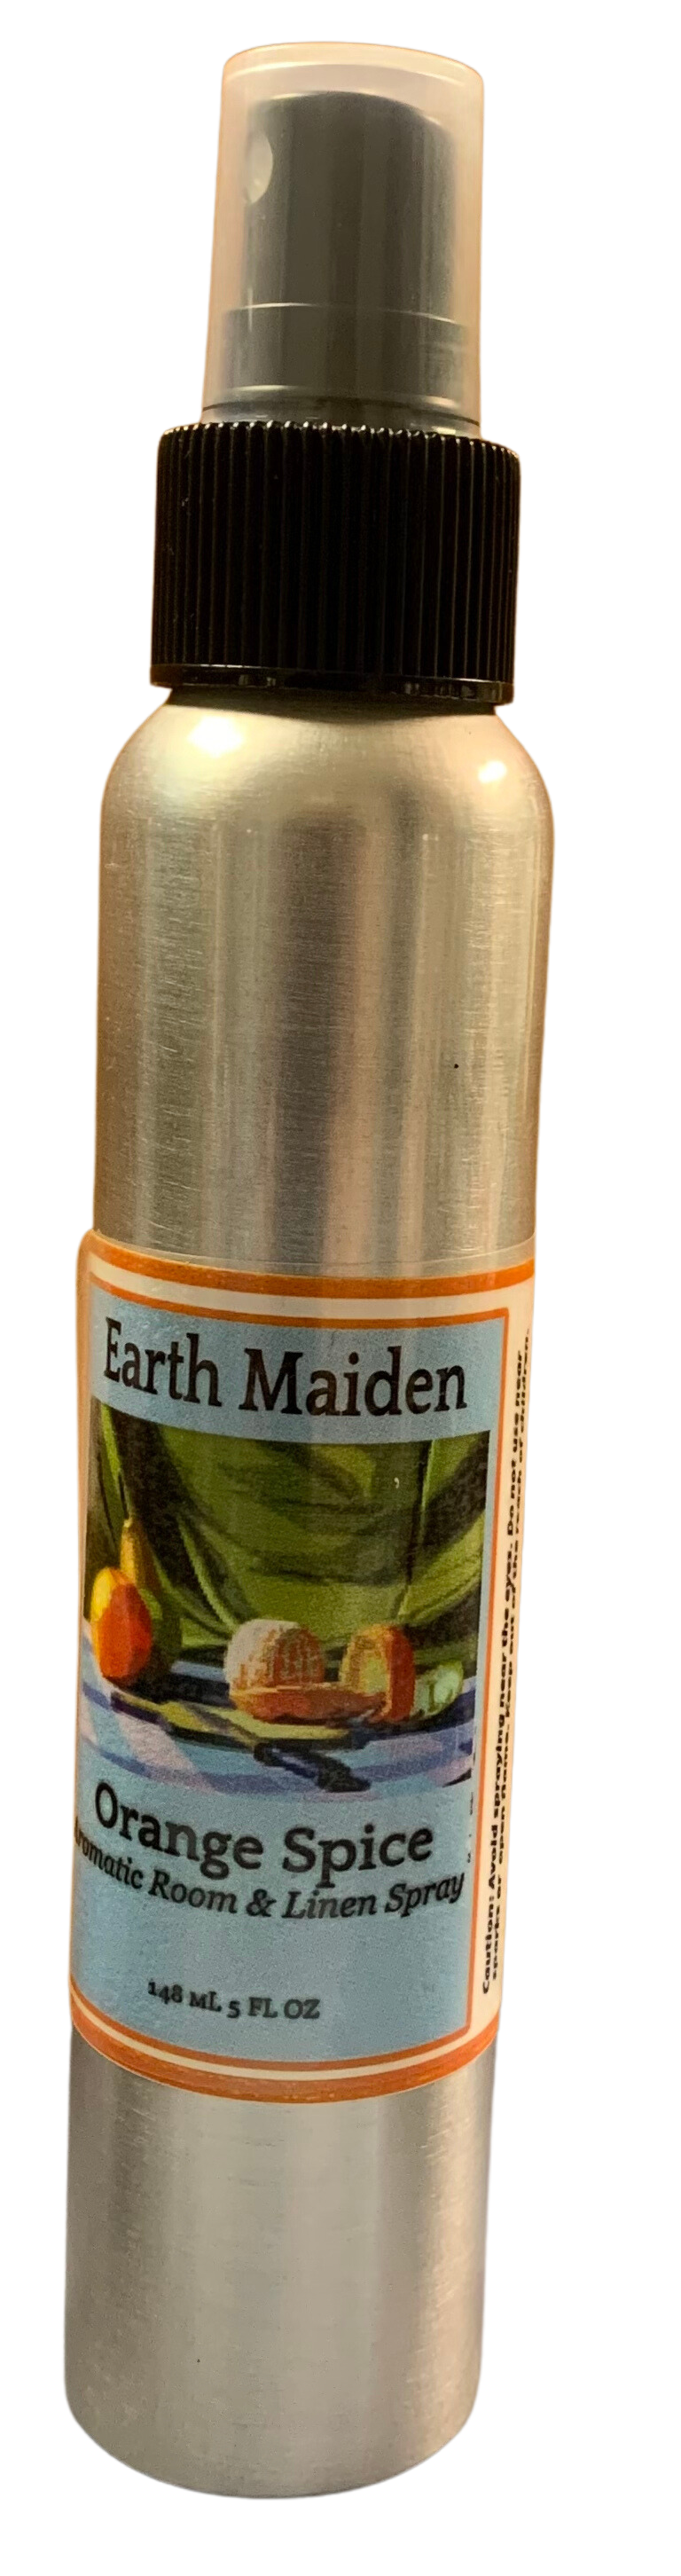 All Natural “Orange Spice” Aroma Mist with Sweet Orange, Cinnamon Leaf, Cassia, Clove Bud, Coriander Seed, Anise Essential Oils in 5 ounce metal bullet container with fine mist sprayer.